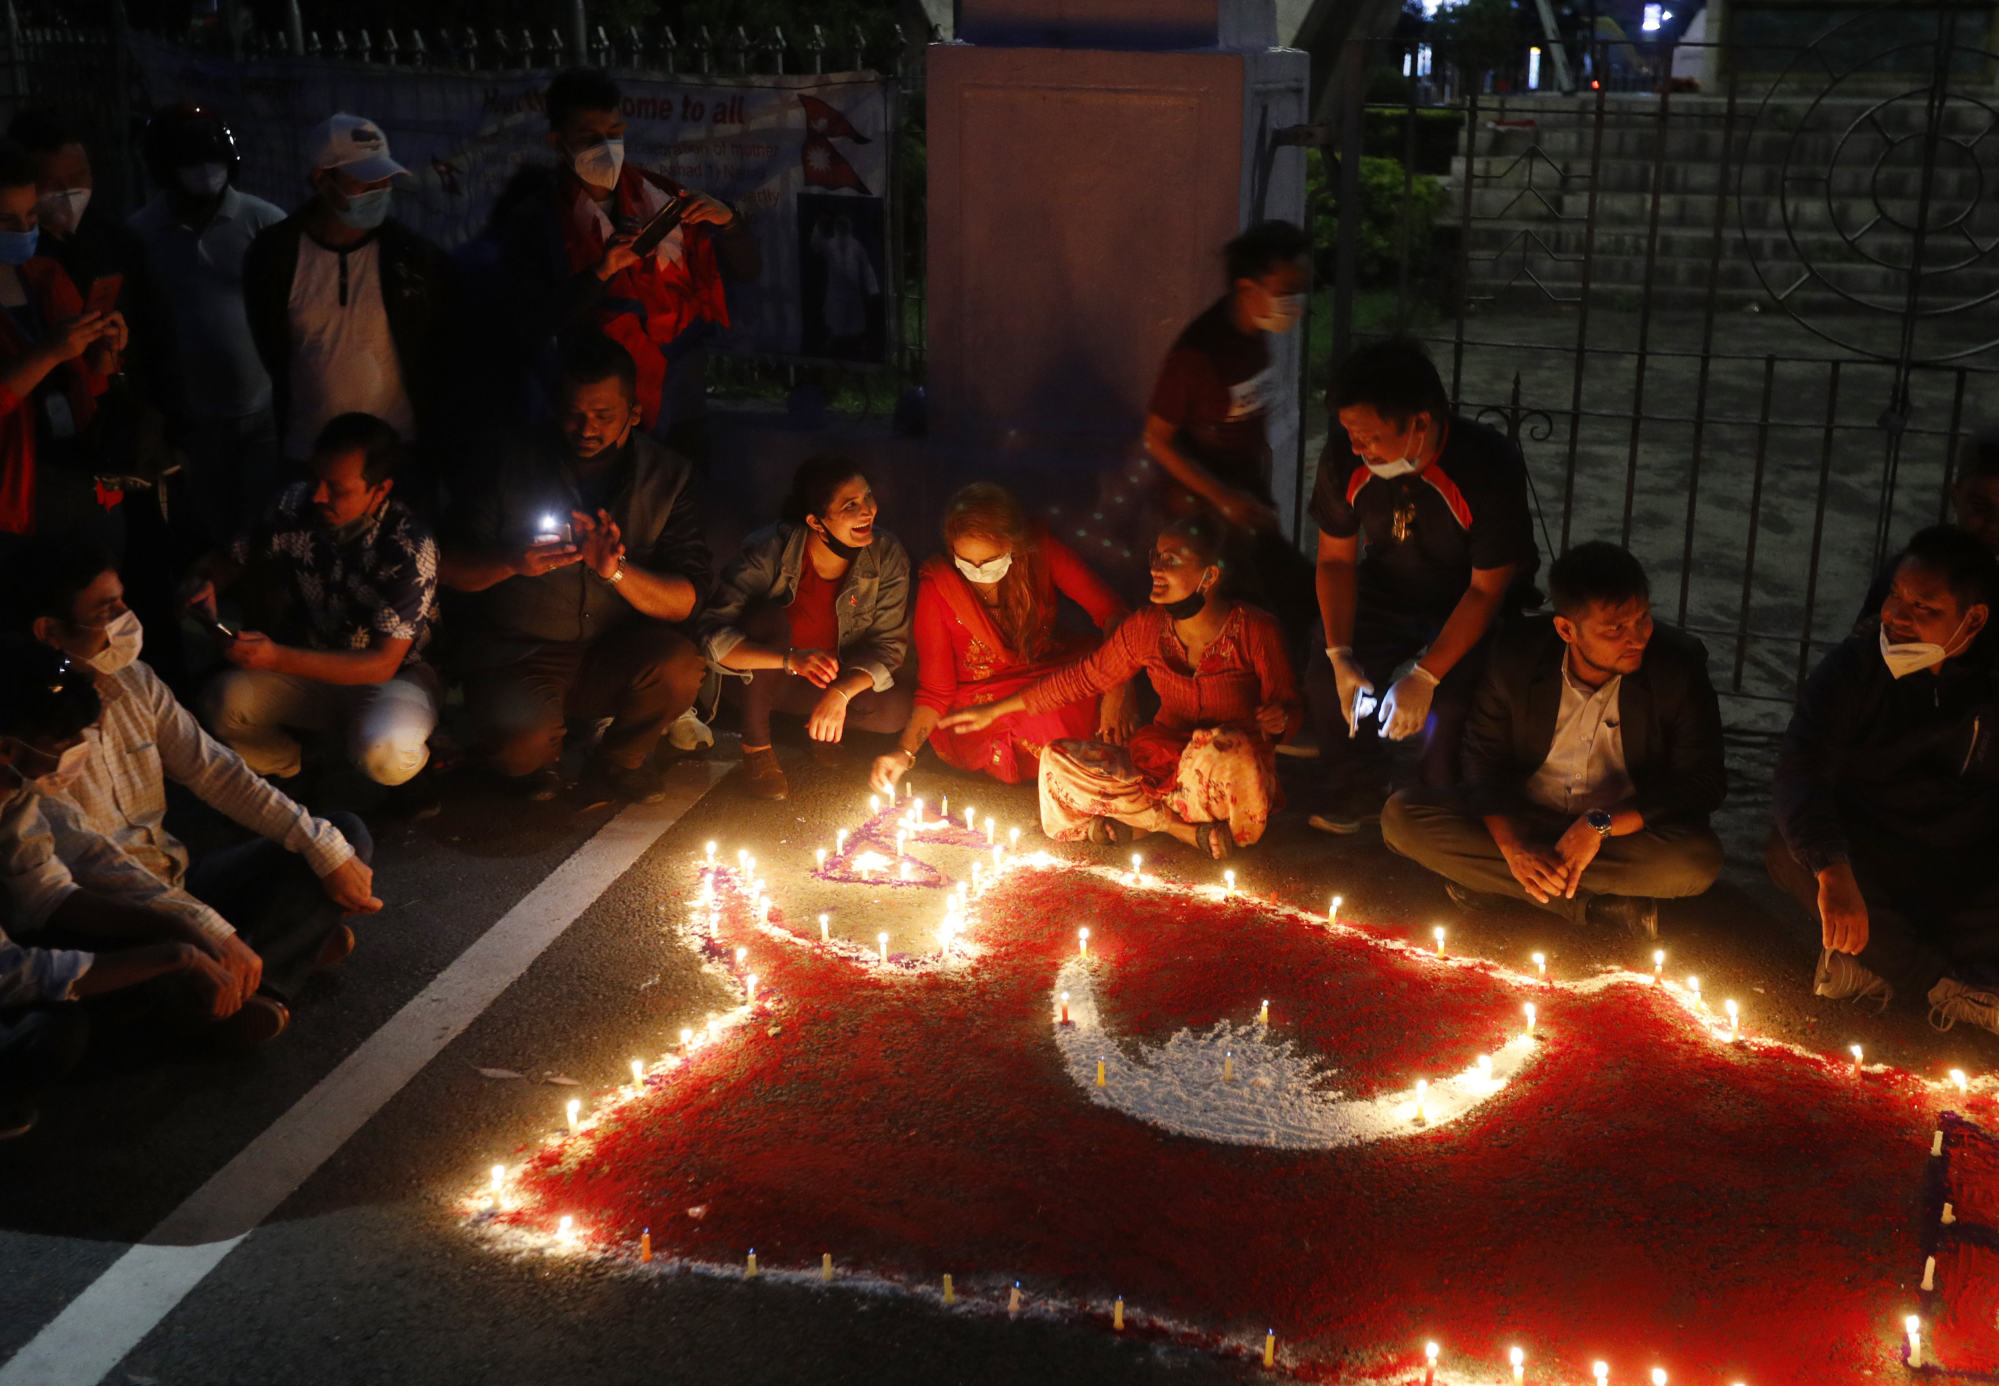 People light candles on an outline of the new map of Nepal drawn on a road as they celebrate the approval of the political map to include territory claimed by both India and Nepal, in Kathmandu, Nepal, in June 2020. Photo: AP